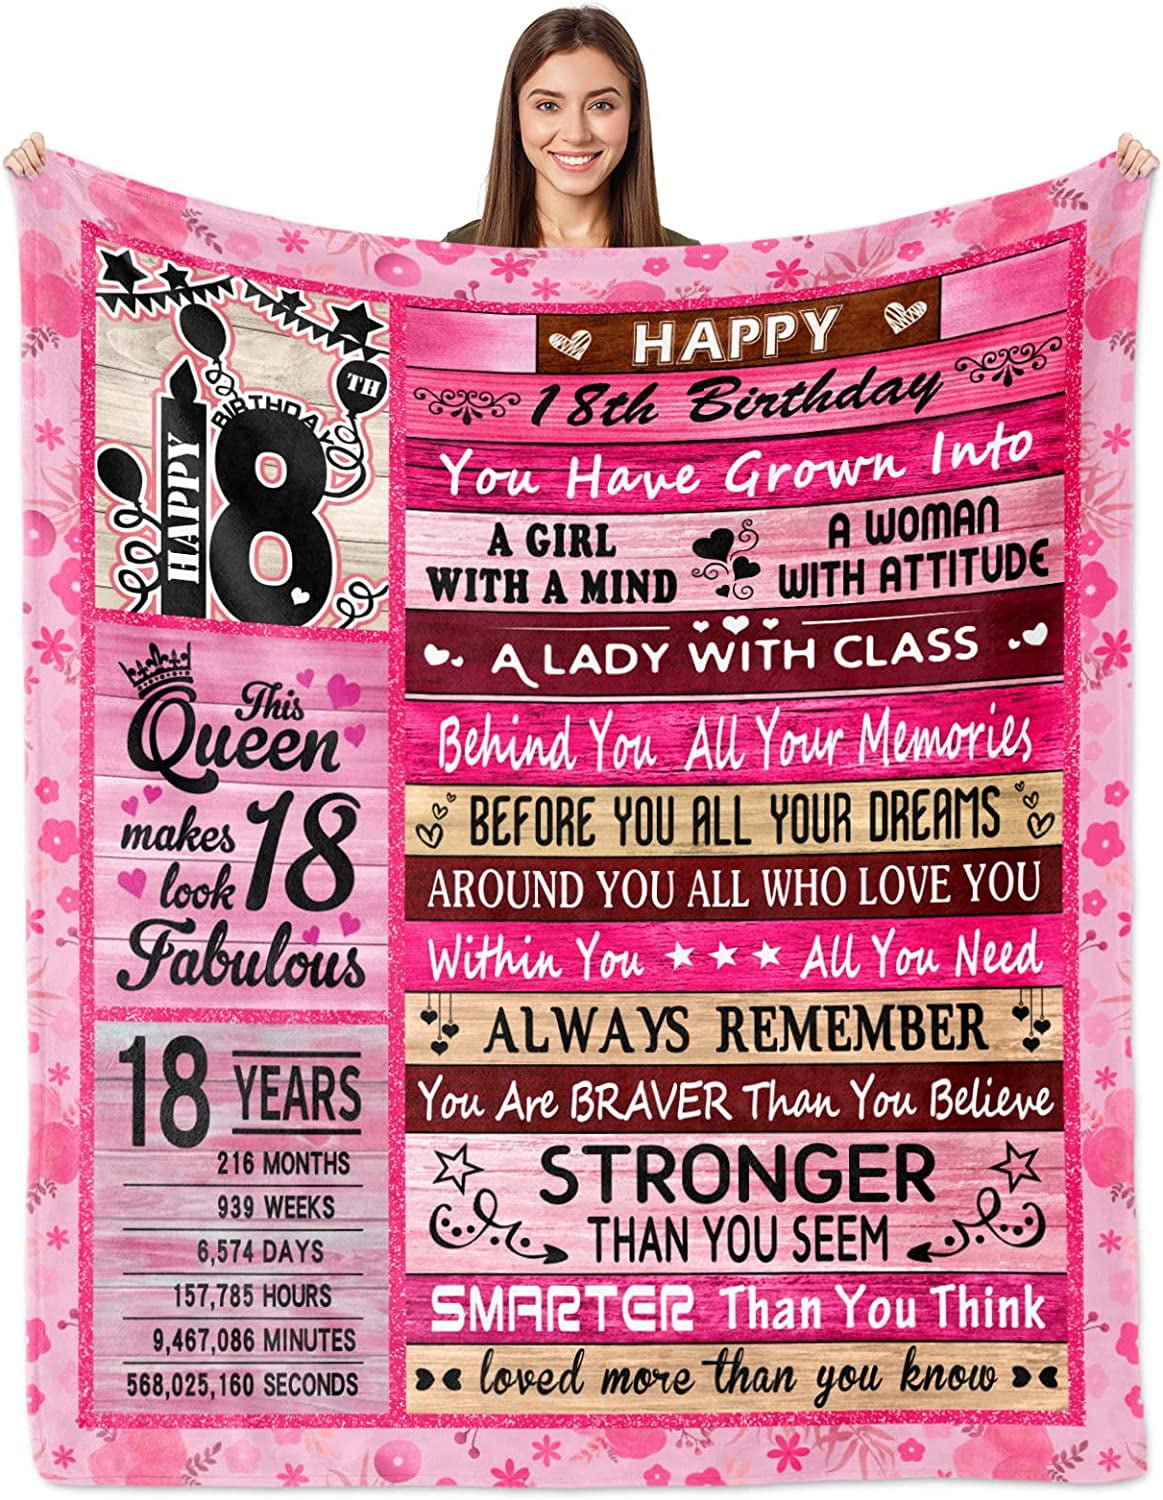 thinkstar Gifts for 10 Year Old Girl Blankets,10th Birthday Gifts for Girls,10 Year Old Girl Gift Ideas,10th Birthday Decorations fo